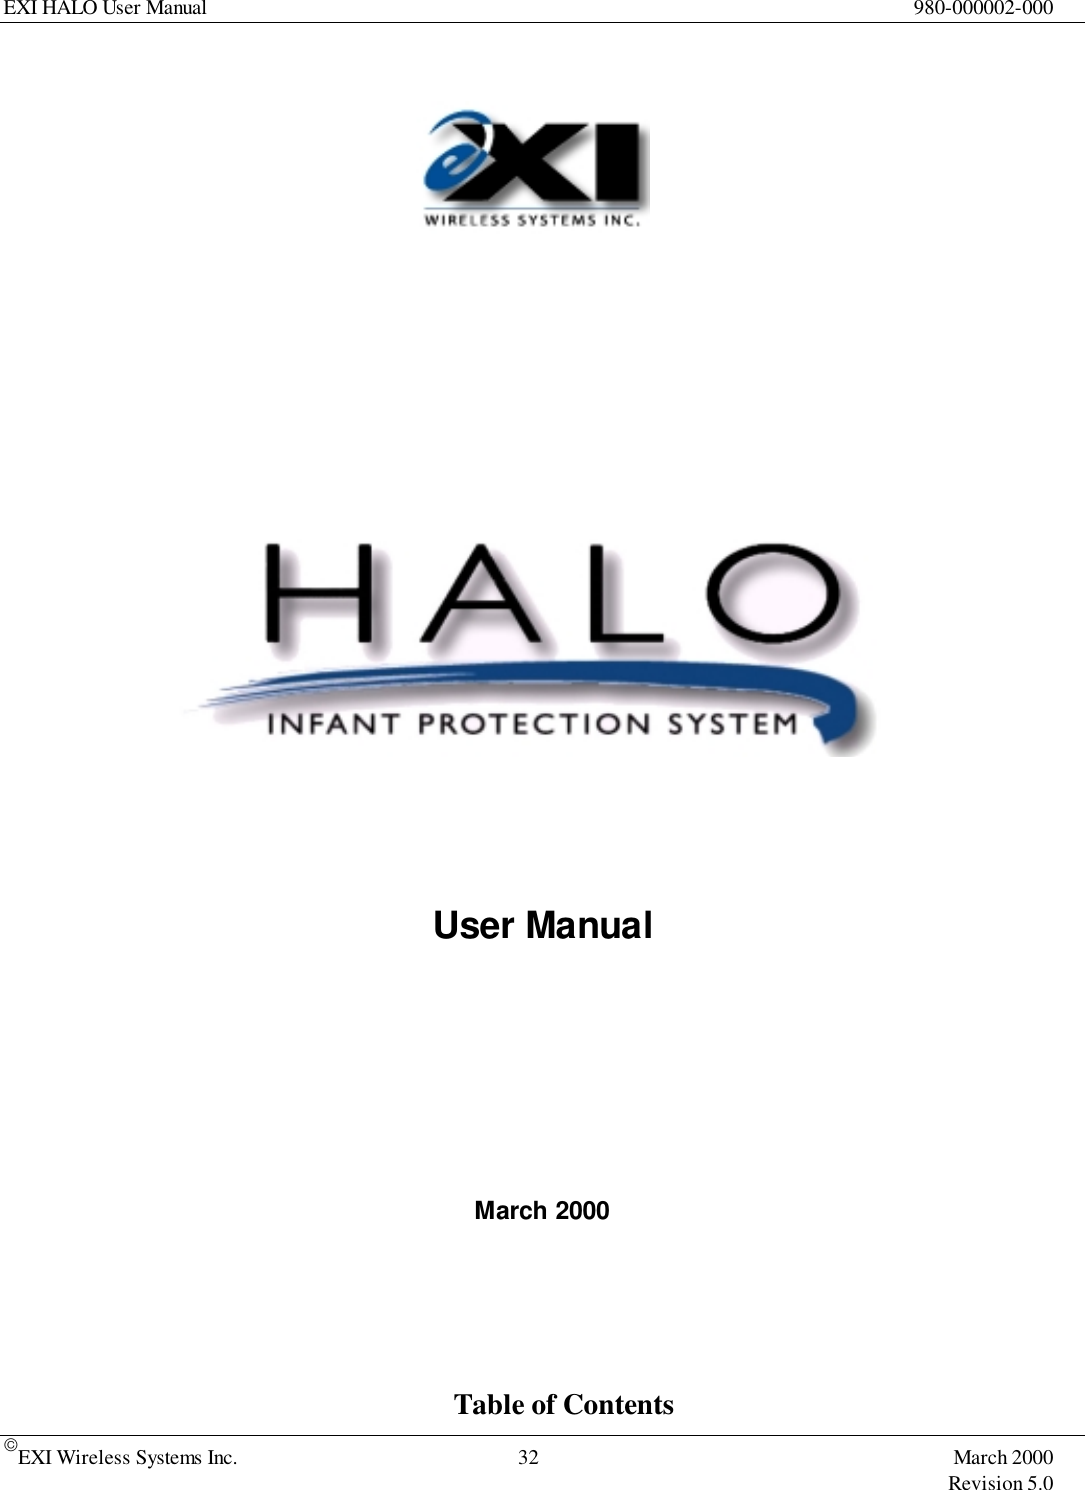 EXI HALO User Manual 980-000002-000EXI Wireless Systems Inc. 32 March 2000Revision 5.0User ManualMarch 2000Table of Contents